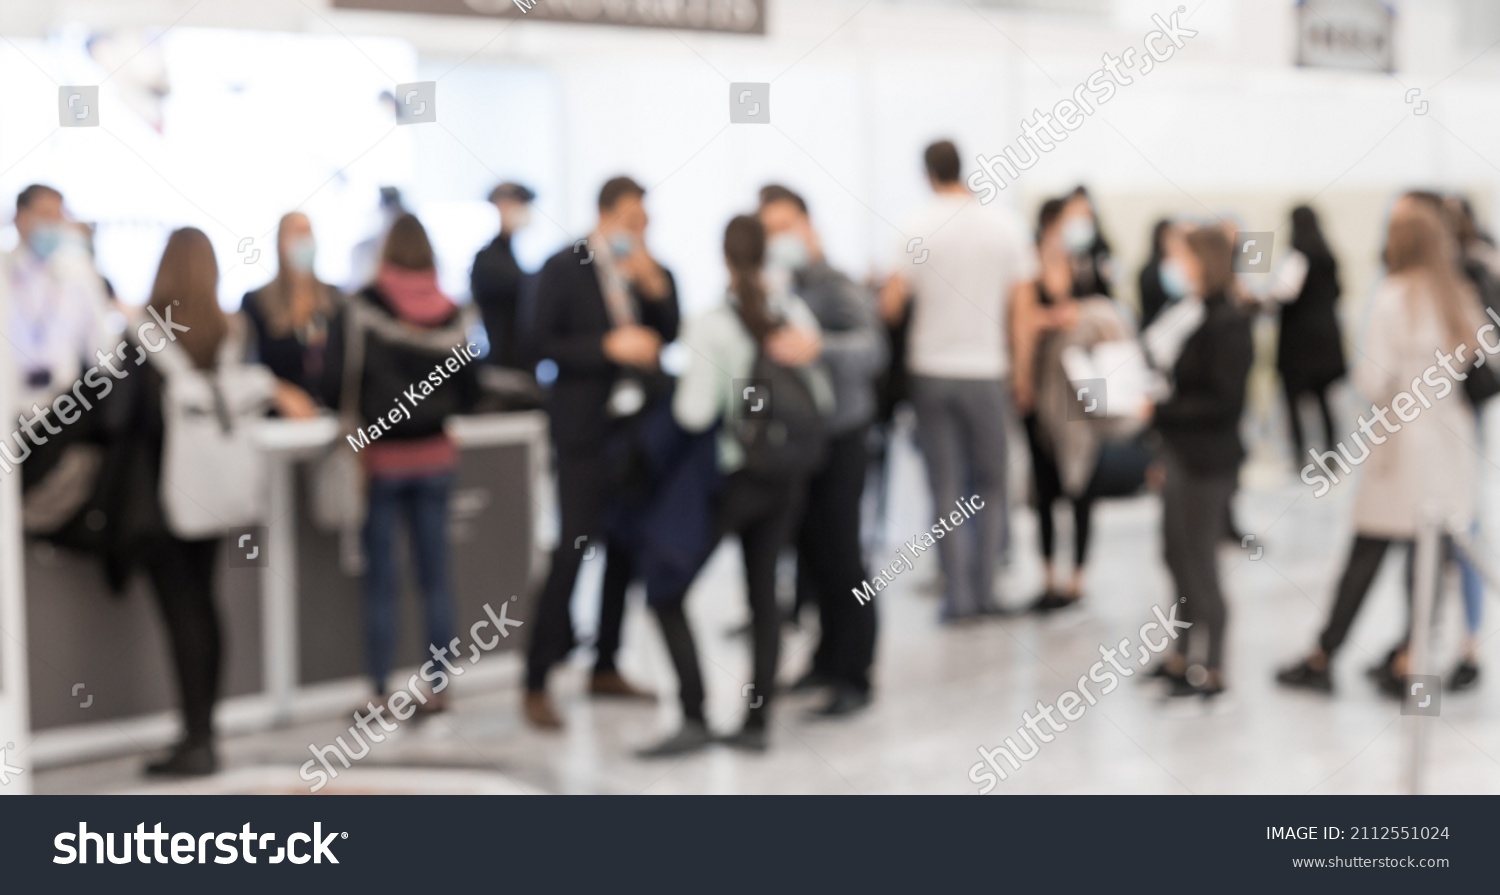 Abstract blured people at exhibition hall of expo event trade show. Business convention show or job fair. Business concept background. #2112551024